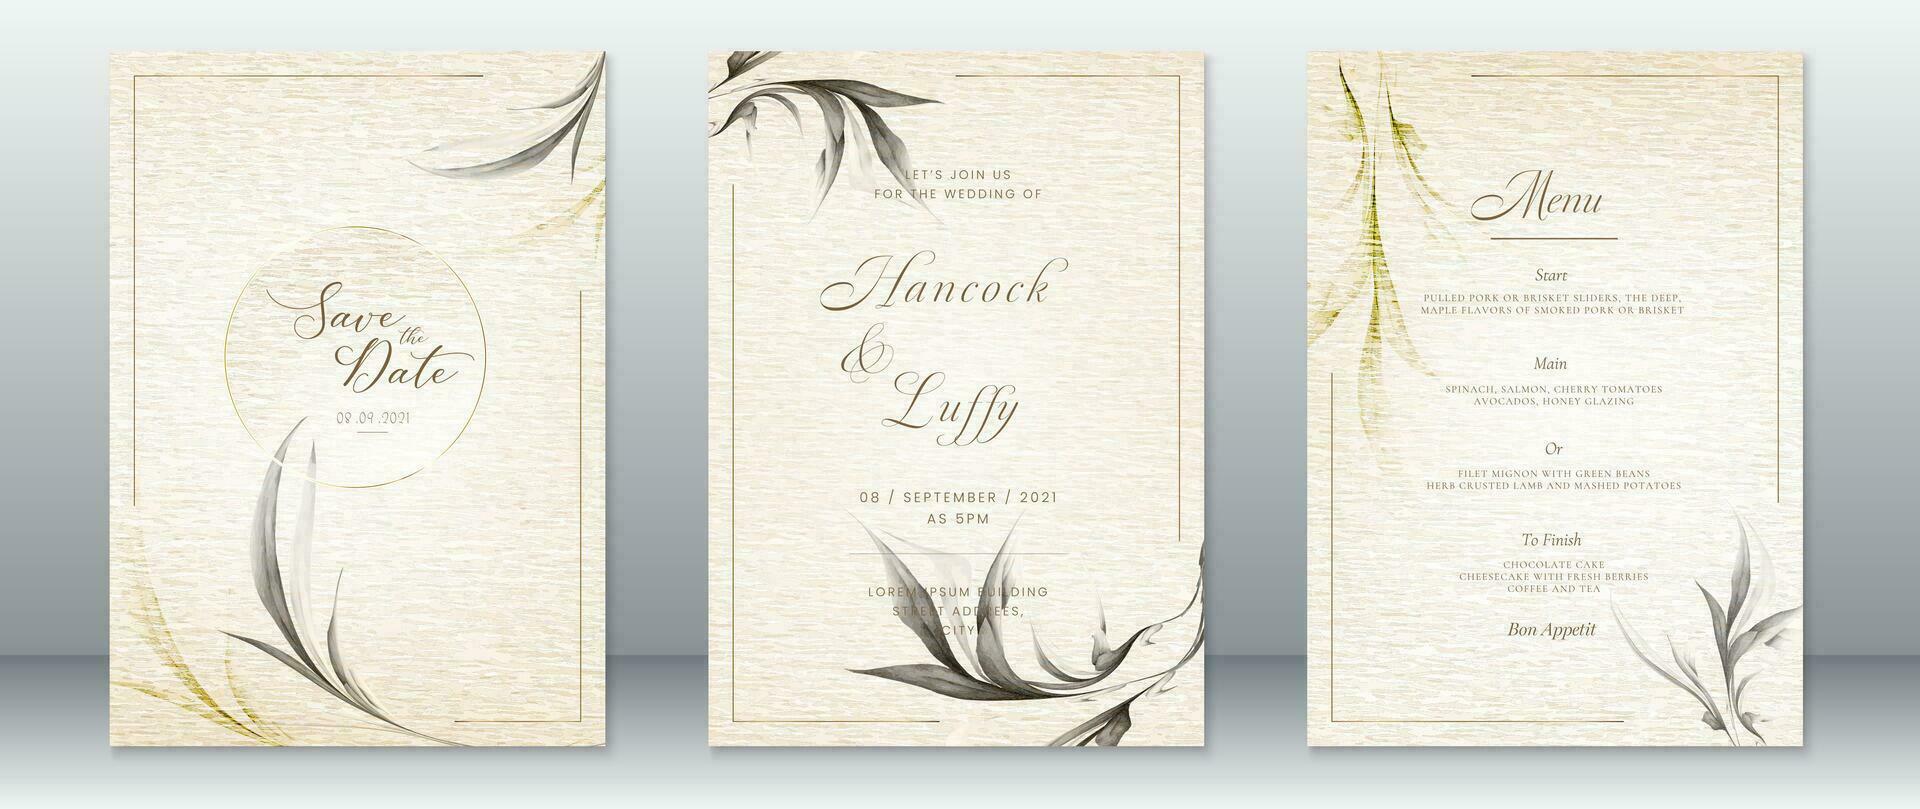 Wedding invitation card template with nature leaf design vector